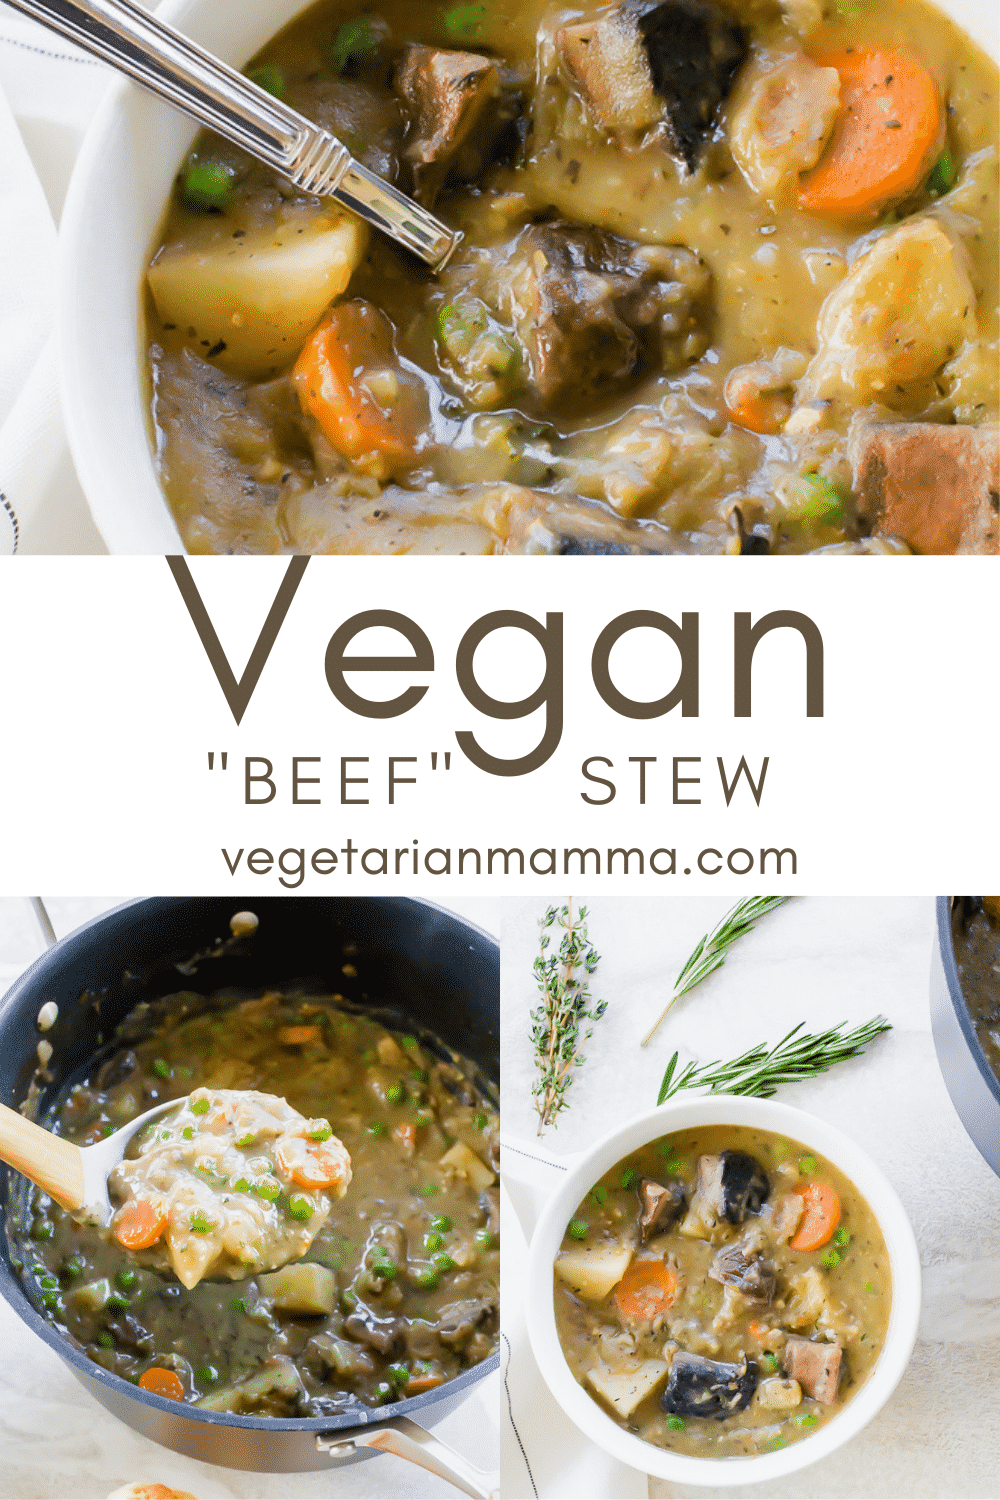 This Vegan Beef Stew is a savory blend of fresh herbs and vegetables. The stew combines plant-based ingredients to deliver superb flavor and texture. #vegan #veganbeefstew #meatlessstew